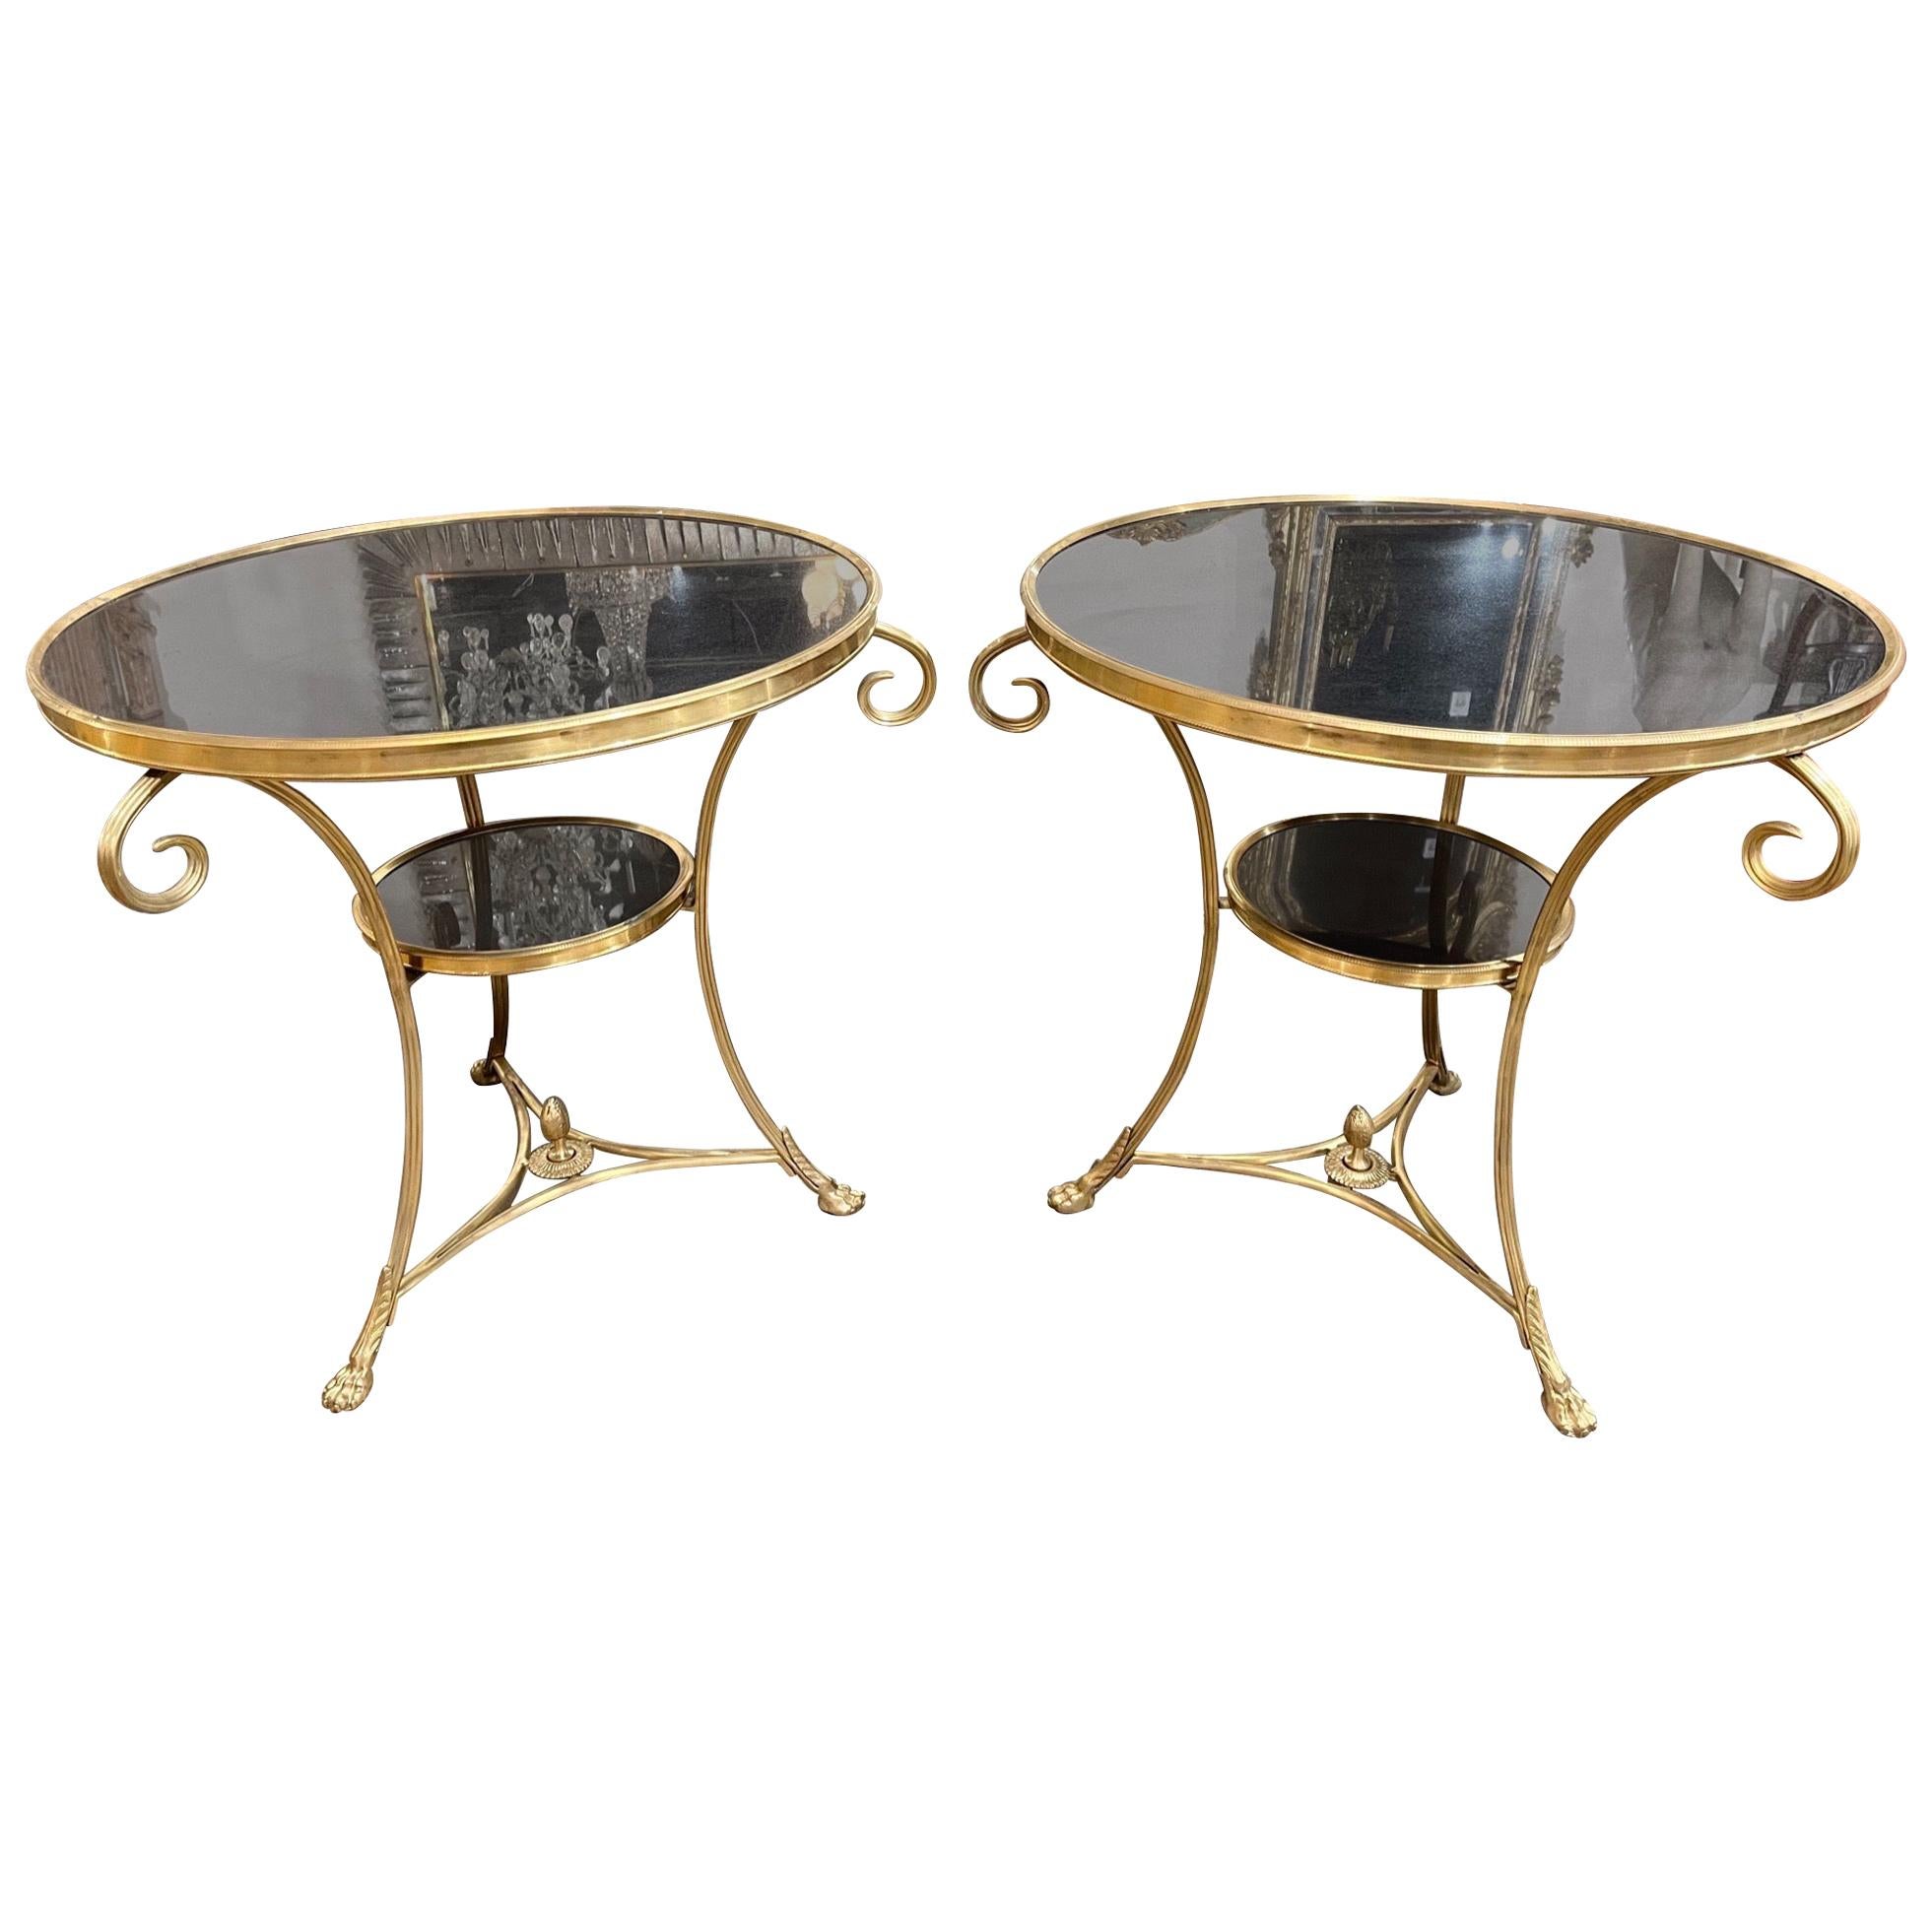 French Gilt Bronze and Granite Gueridon Tables